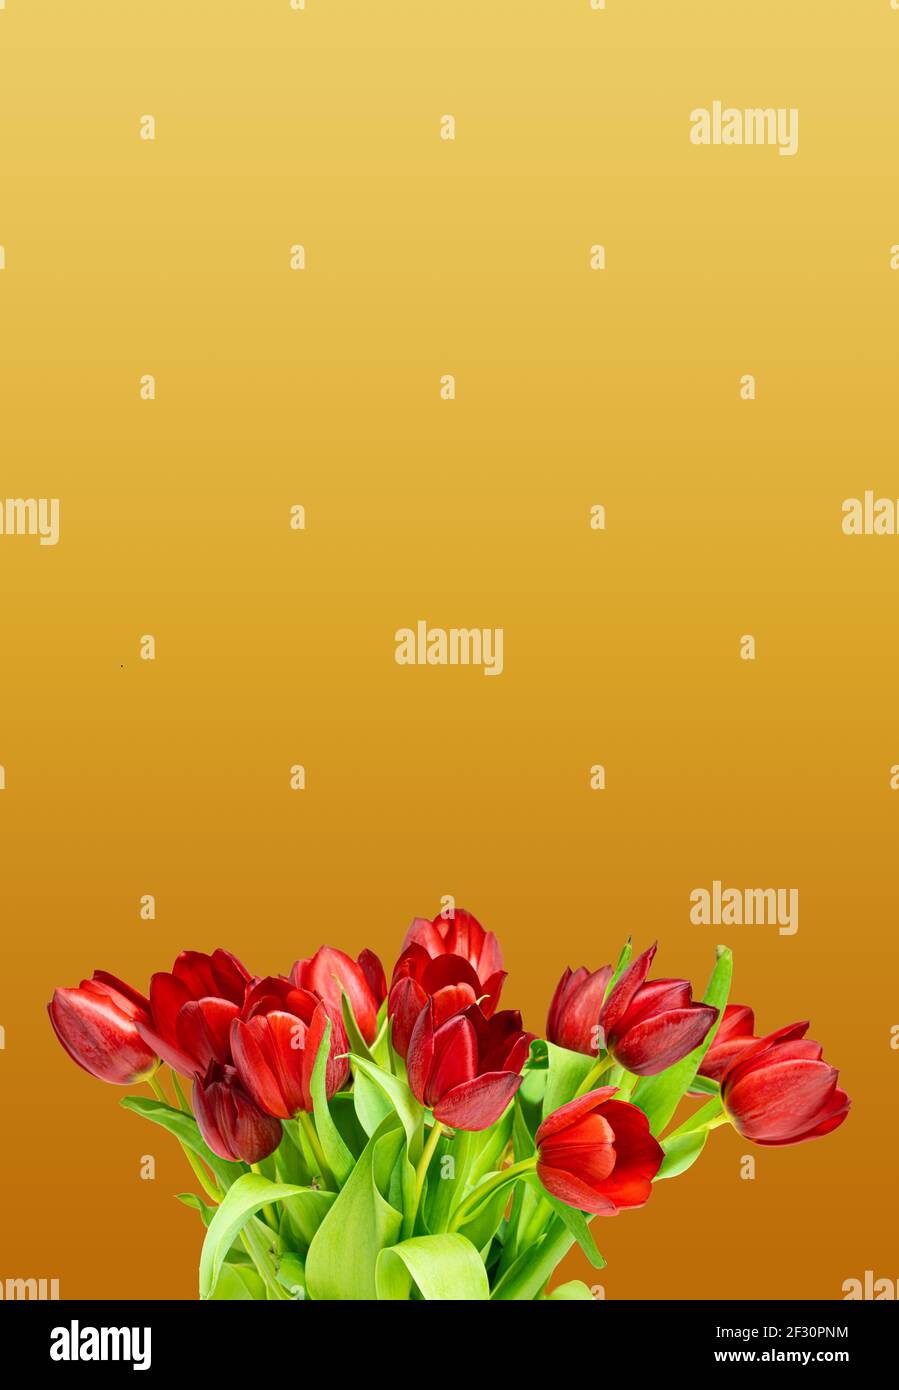 Red tulips bouquet on a golden backdrop, use as a background Stock Photo